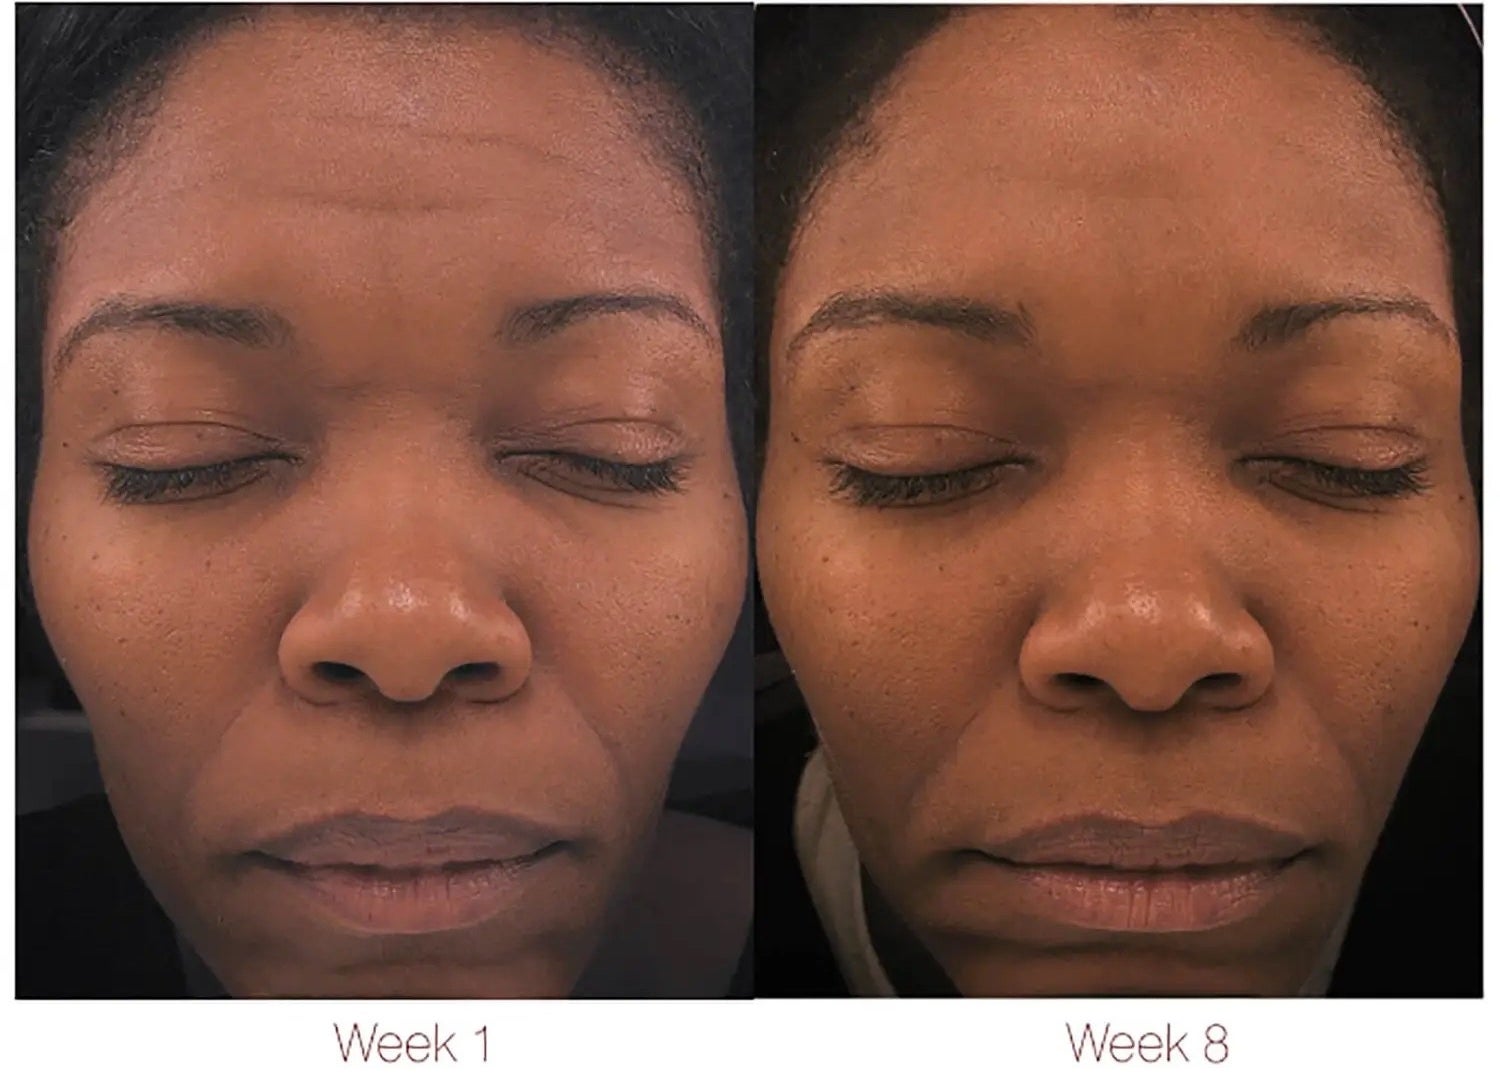 before of person with dull skin and some wrinkles, then after 8 weeks later of their skin looking brighter and wrinkles less noticeable